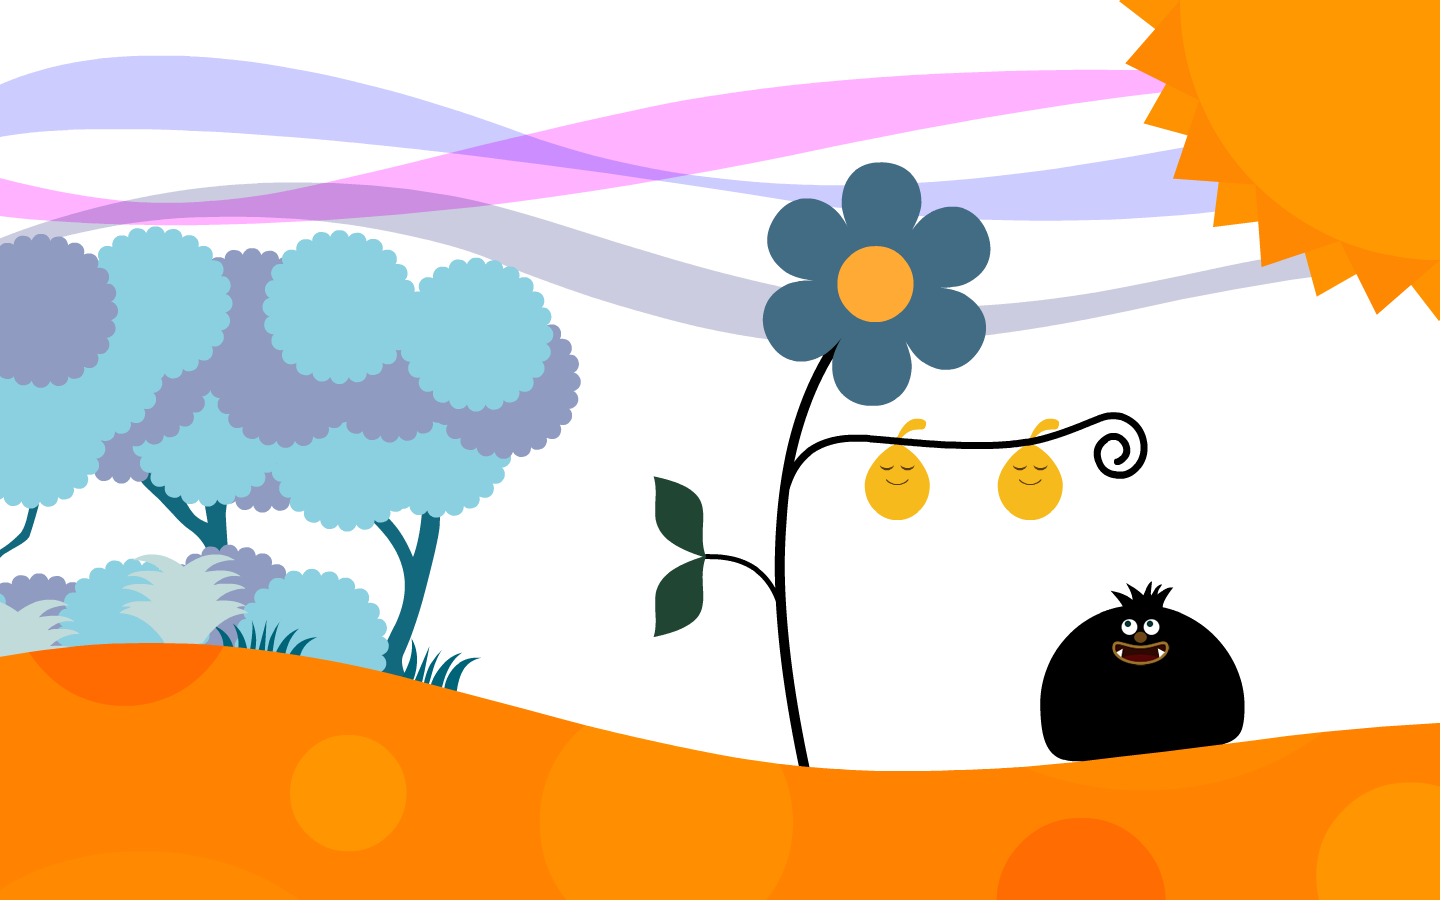 locoroco by mistercow